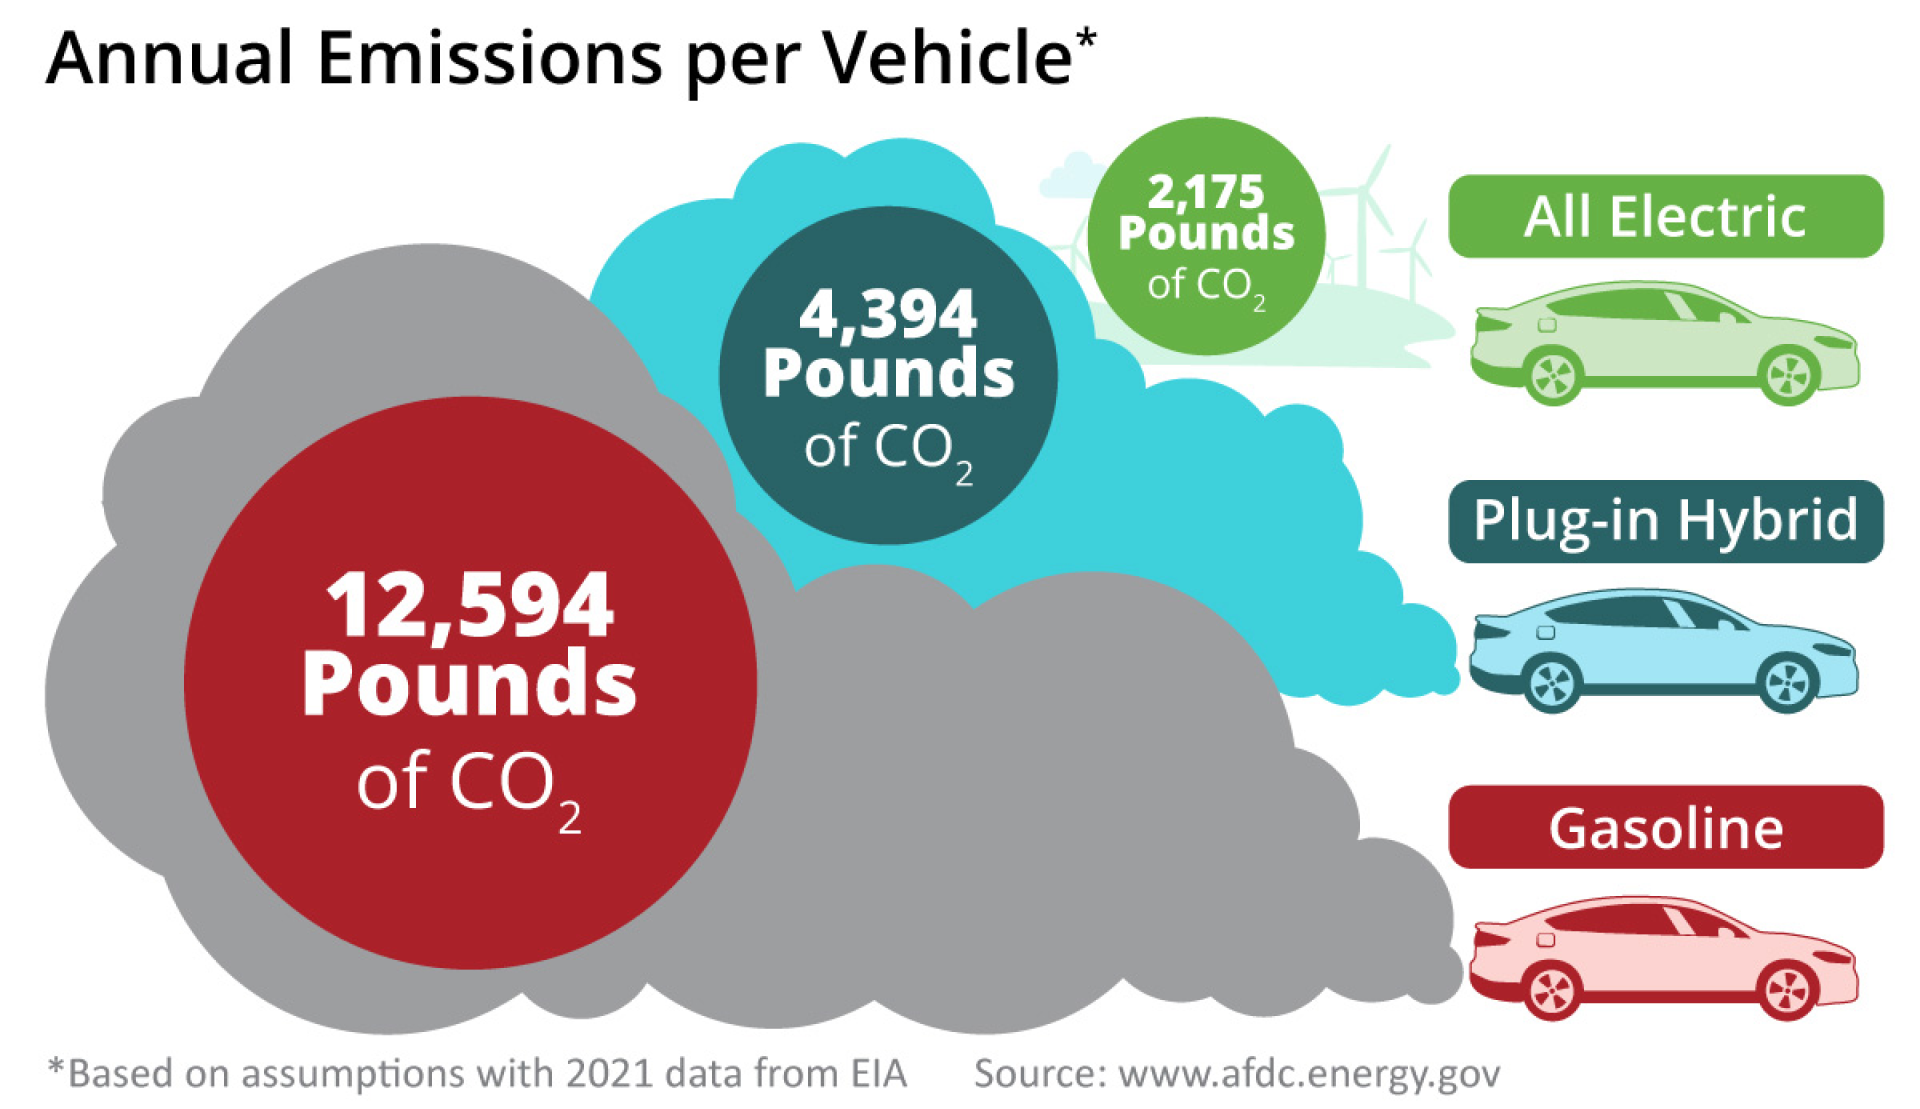 Annual Emissions per Vehicle based on assumptions with 2021 data from EIA. Gasoline: 12,594 pounds of CO2 vs Plug-in Hybrid: 4,394 Pounds of CO2 vs All Electric: 2,175 Pounds of CO2. Source: www.afdc.energy.gov